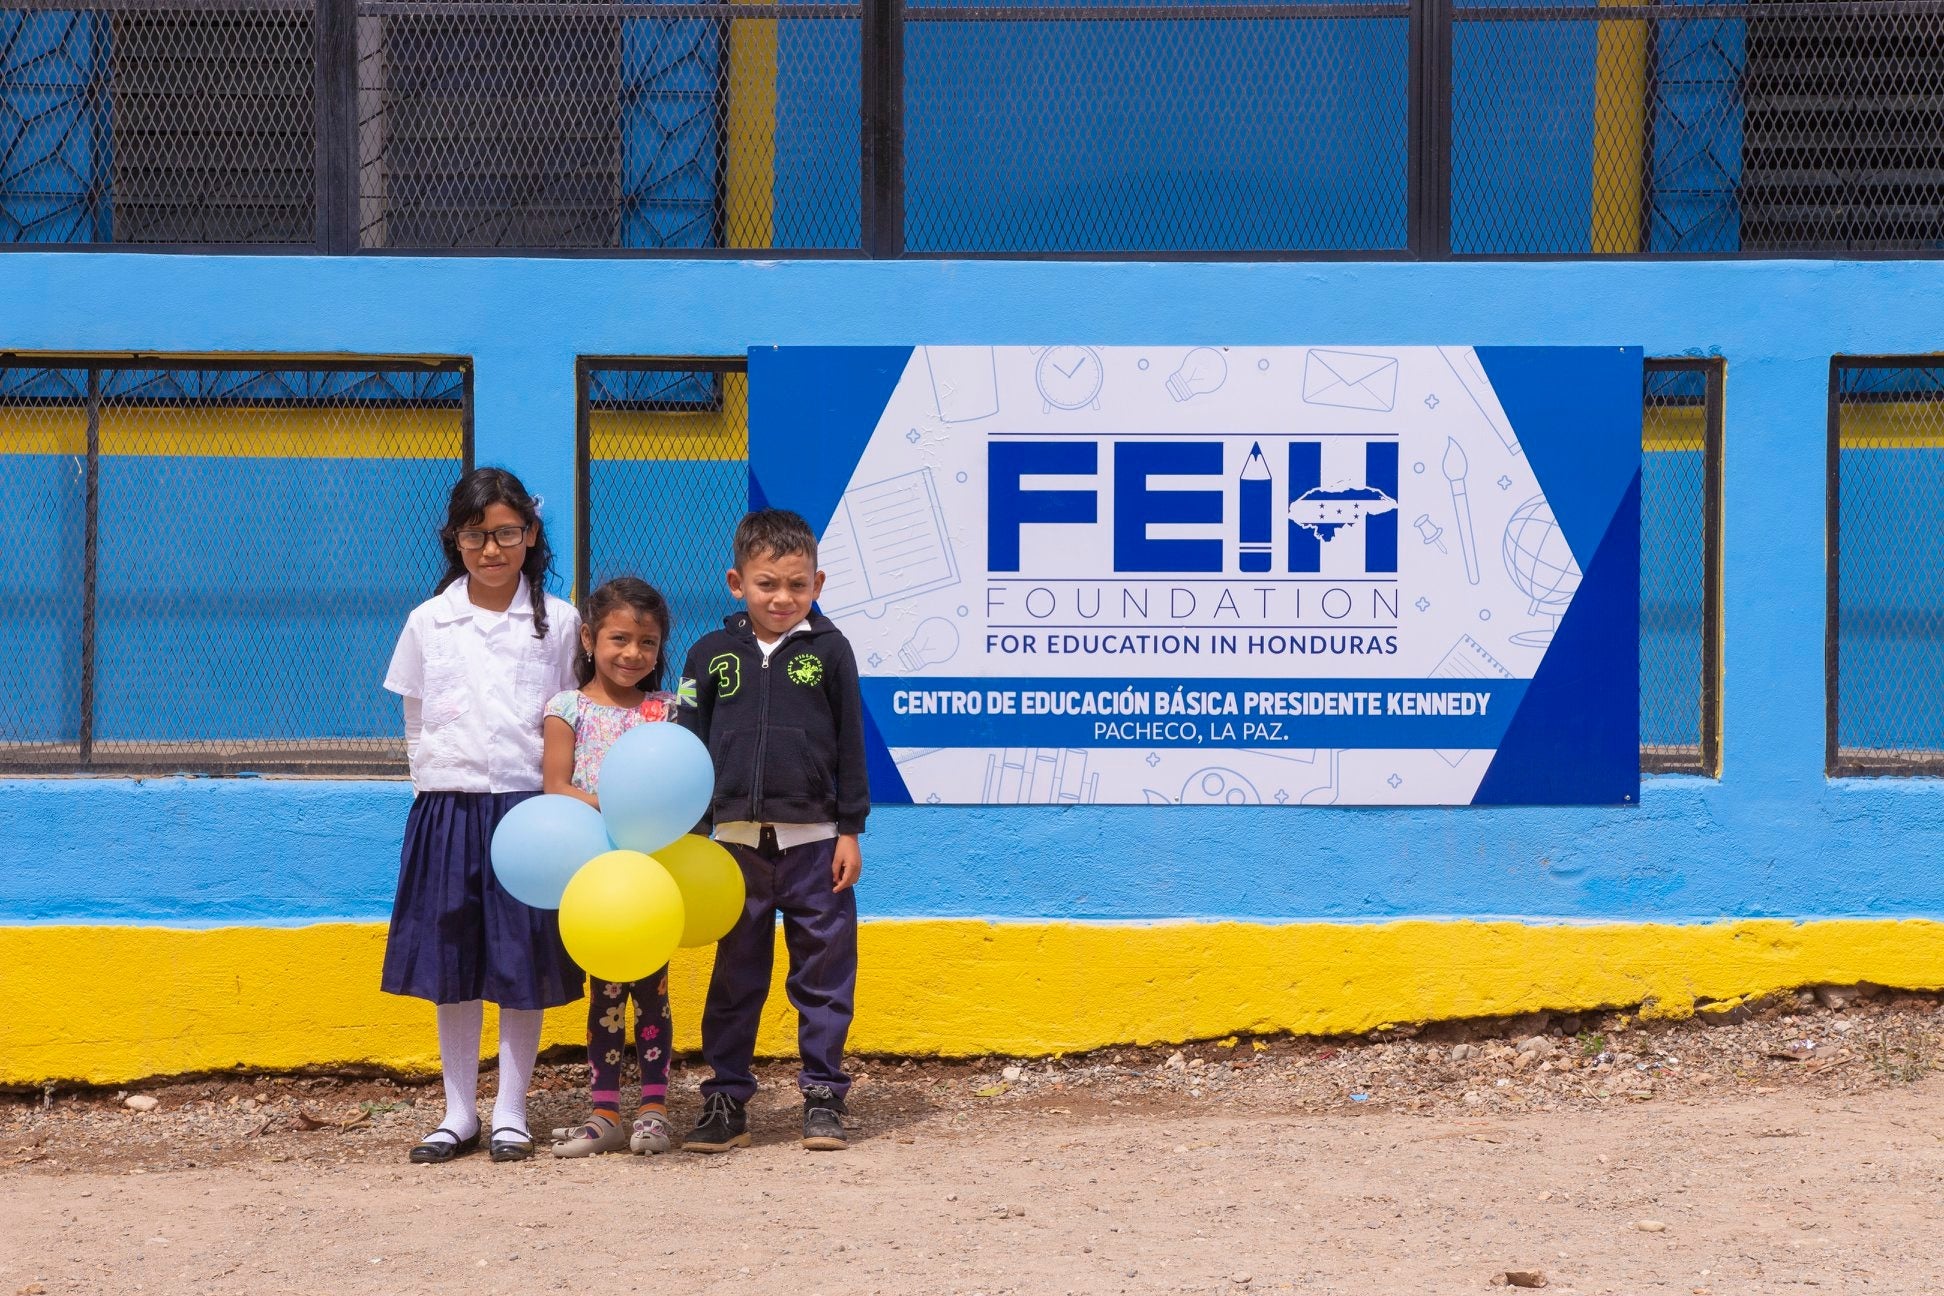 The Foundation for Education in Honduras